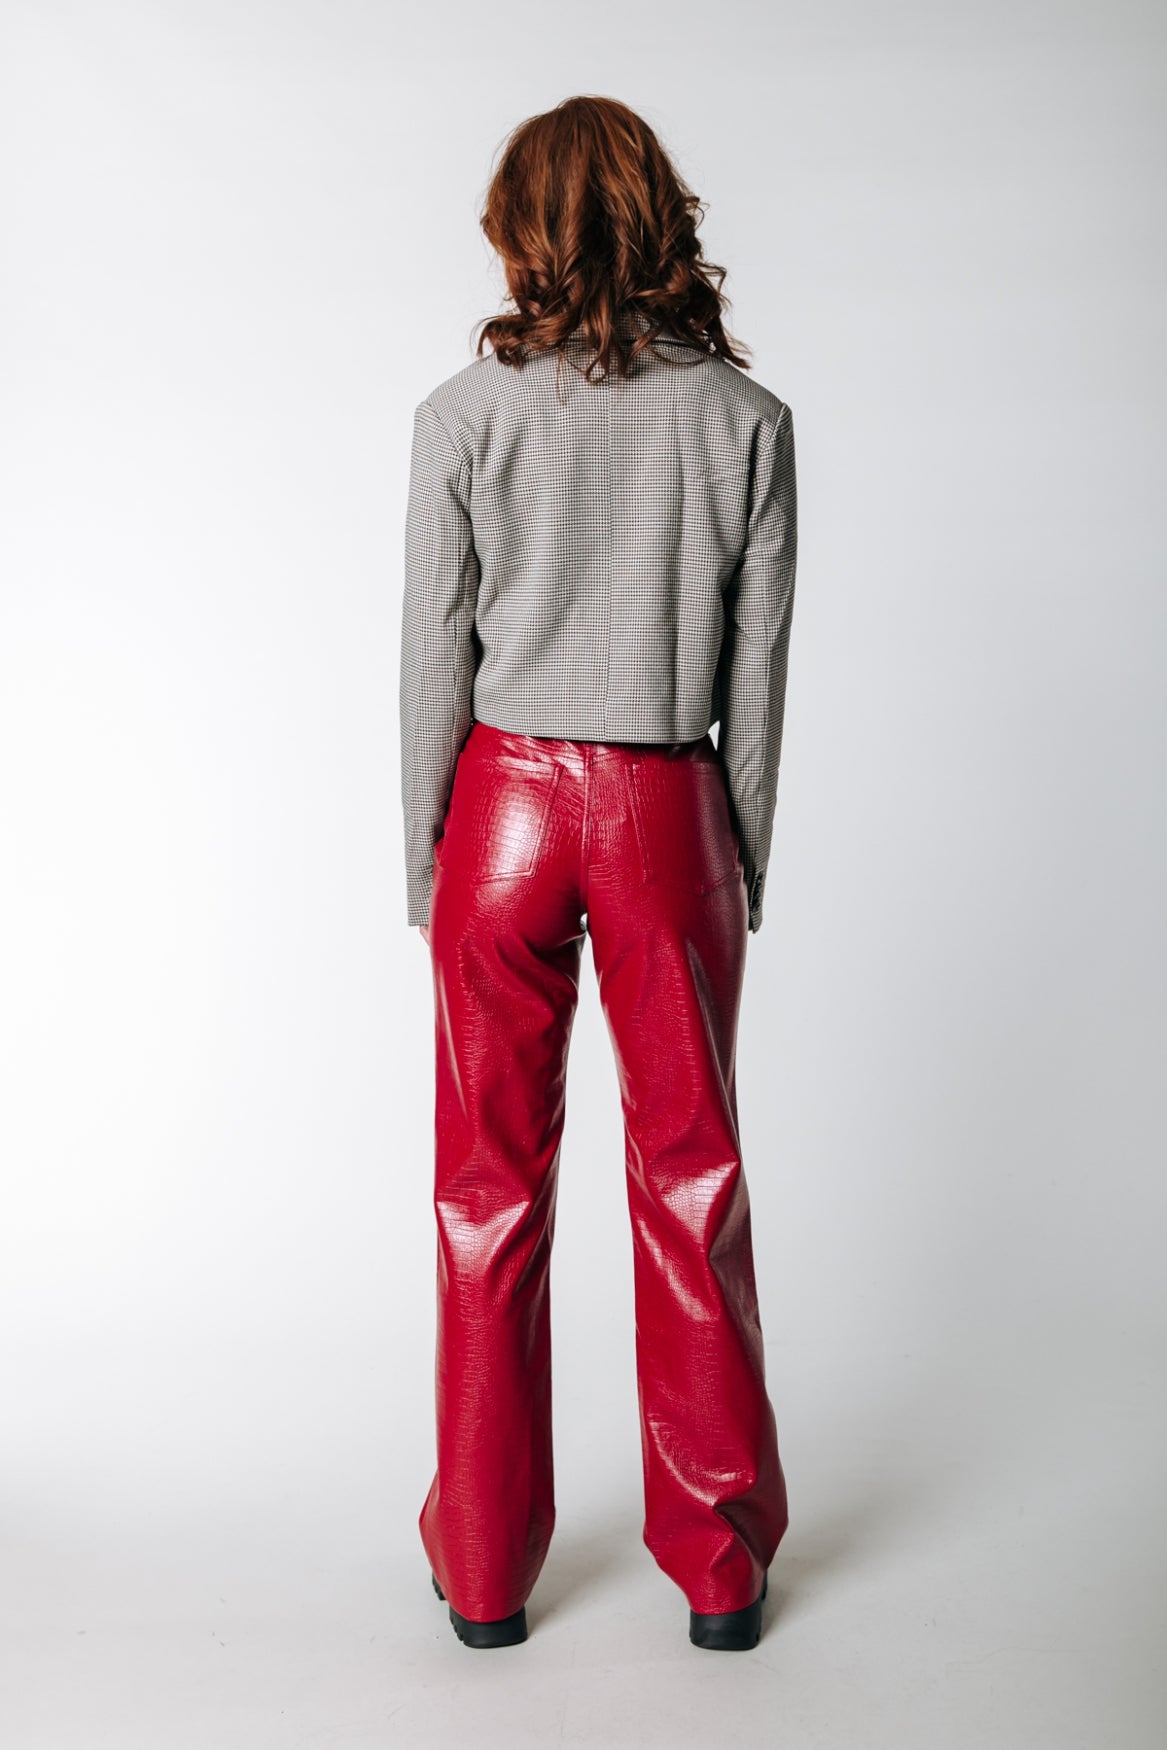 Colourful Rebel Russy Croco Pants | Red